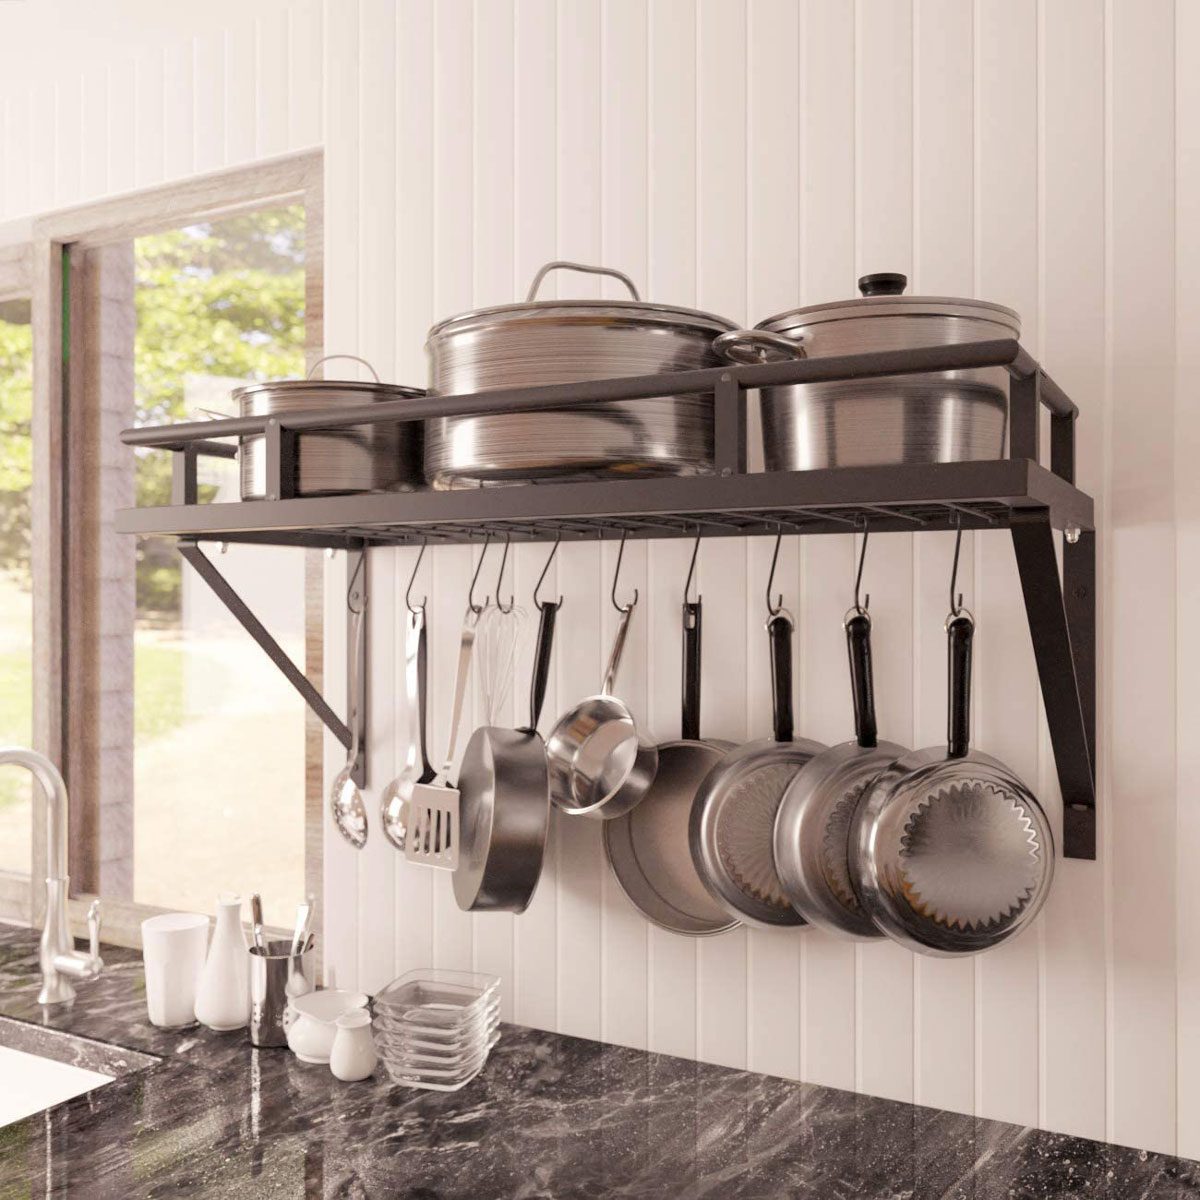 Hot or Not? Pot Racks Over the Stove